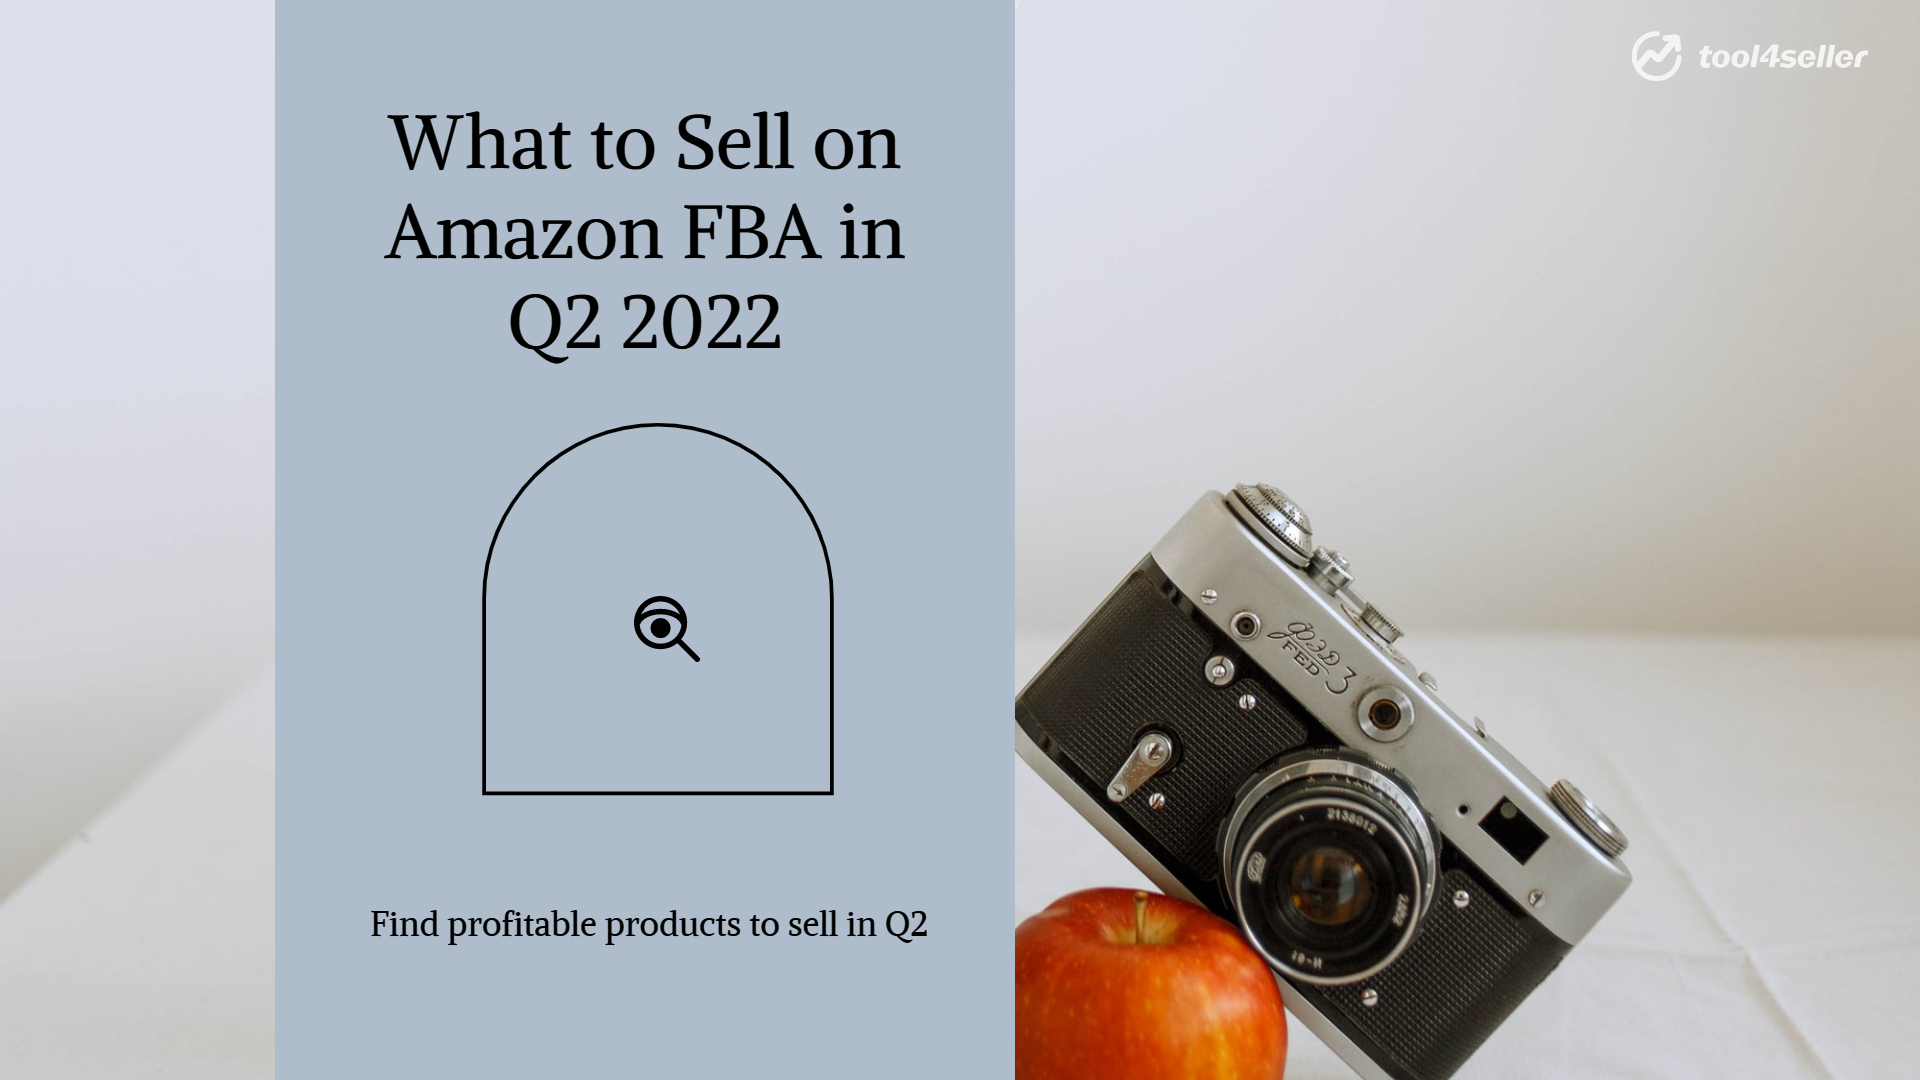 What to Sell on Amazon FBA in Q2 2022